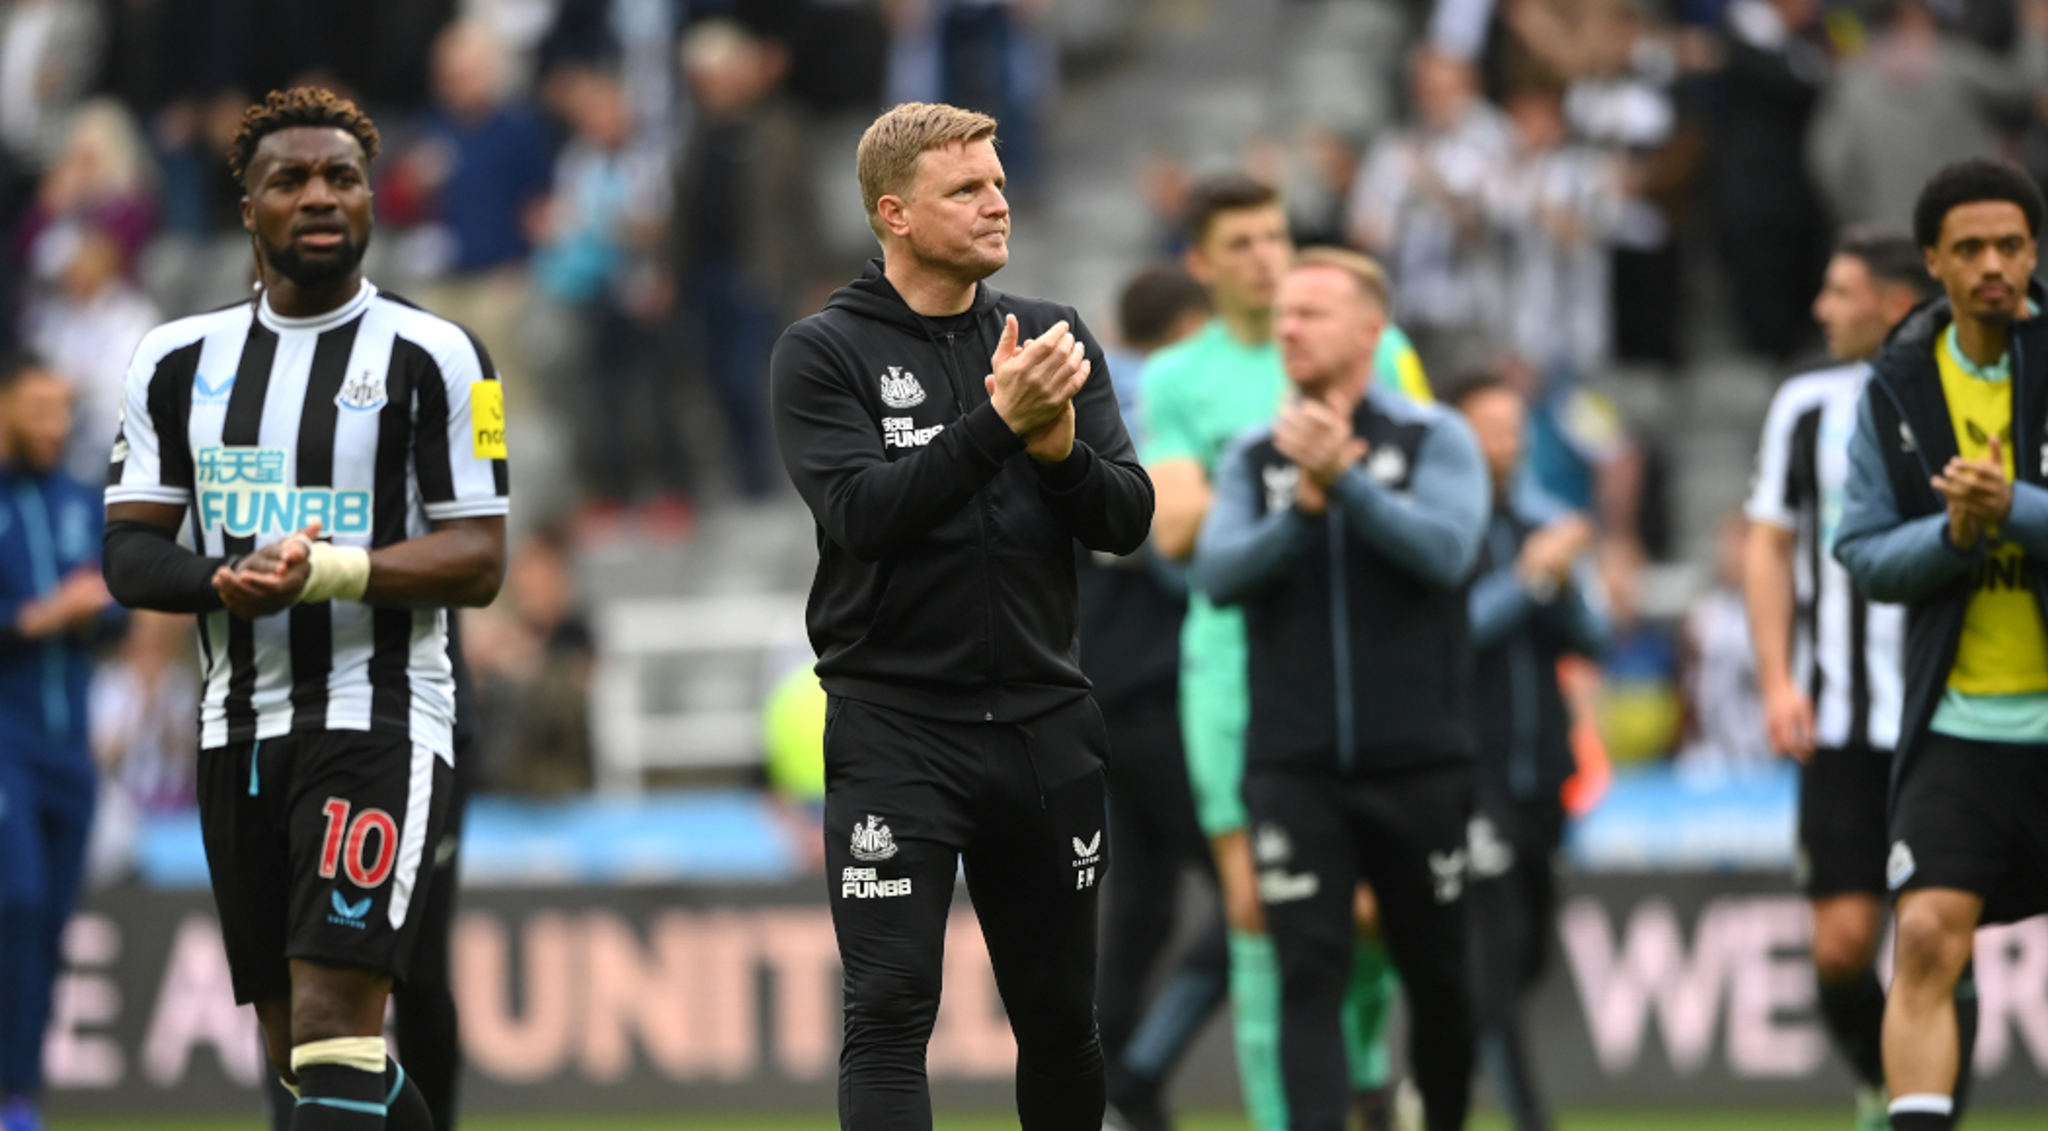 Newcastle 'excited' by top-four challenge - Howe | SuperSport